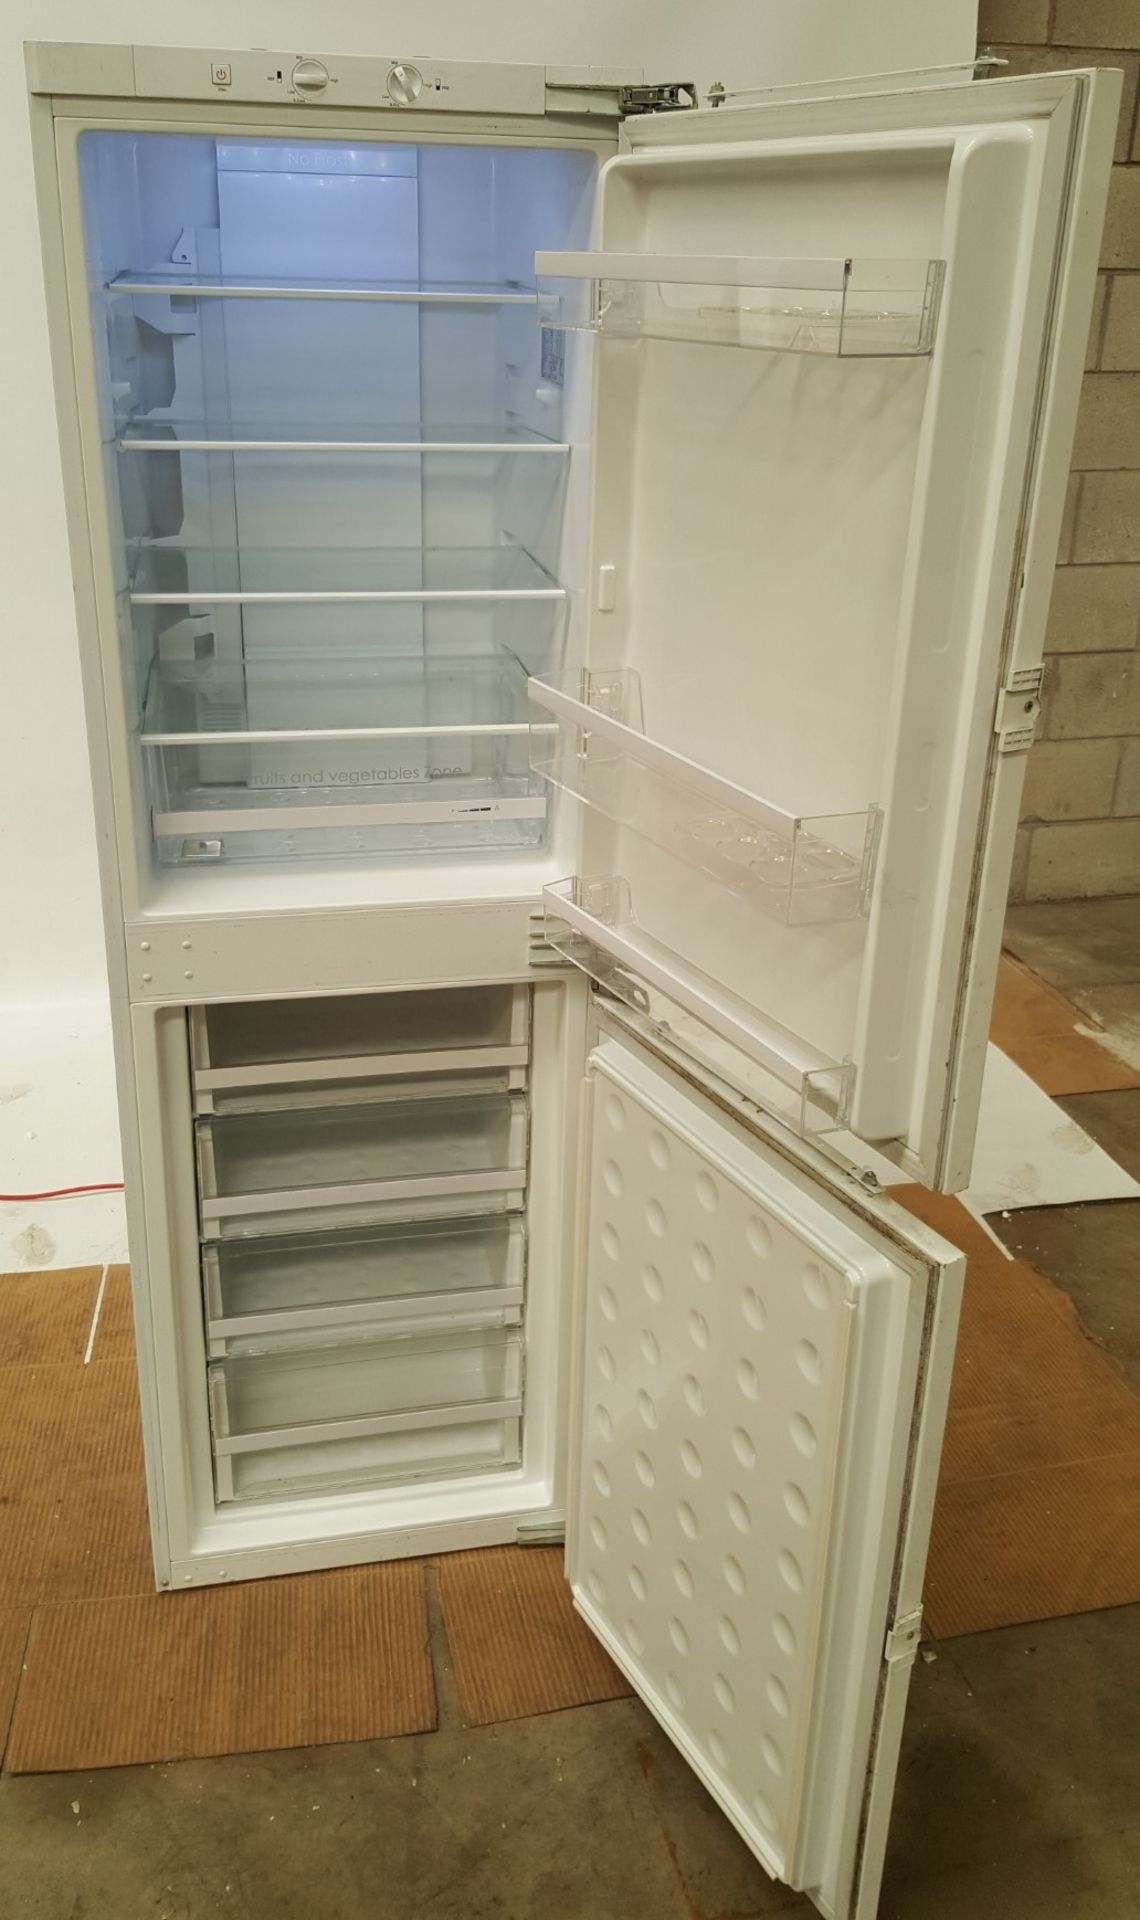 1 x Prima Integrated 50/50 Frost Free Fridge Freezer LPR475A1 - Ref BY188 - Image 4 of 8